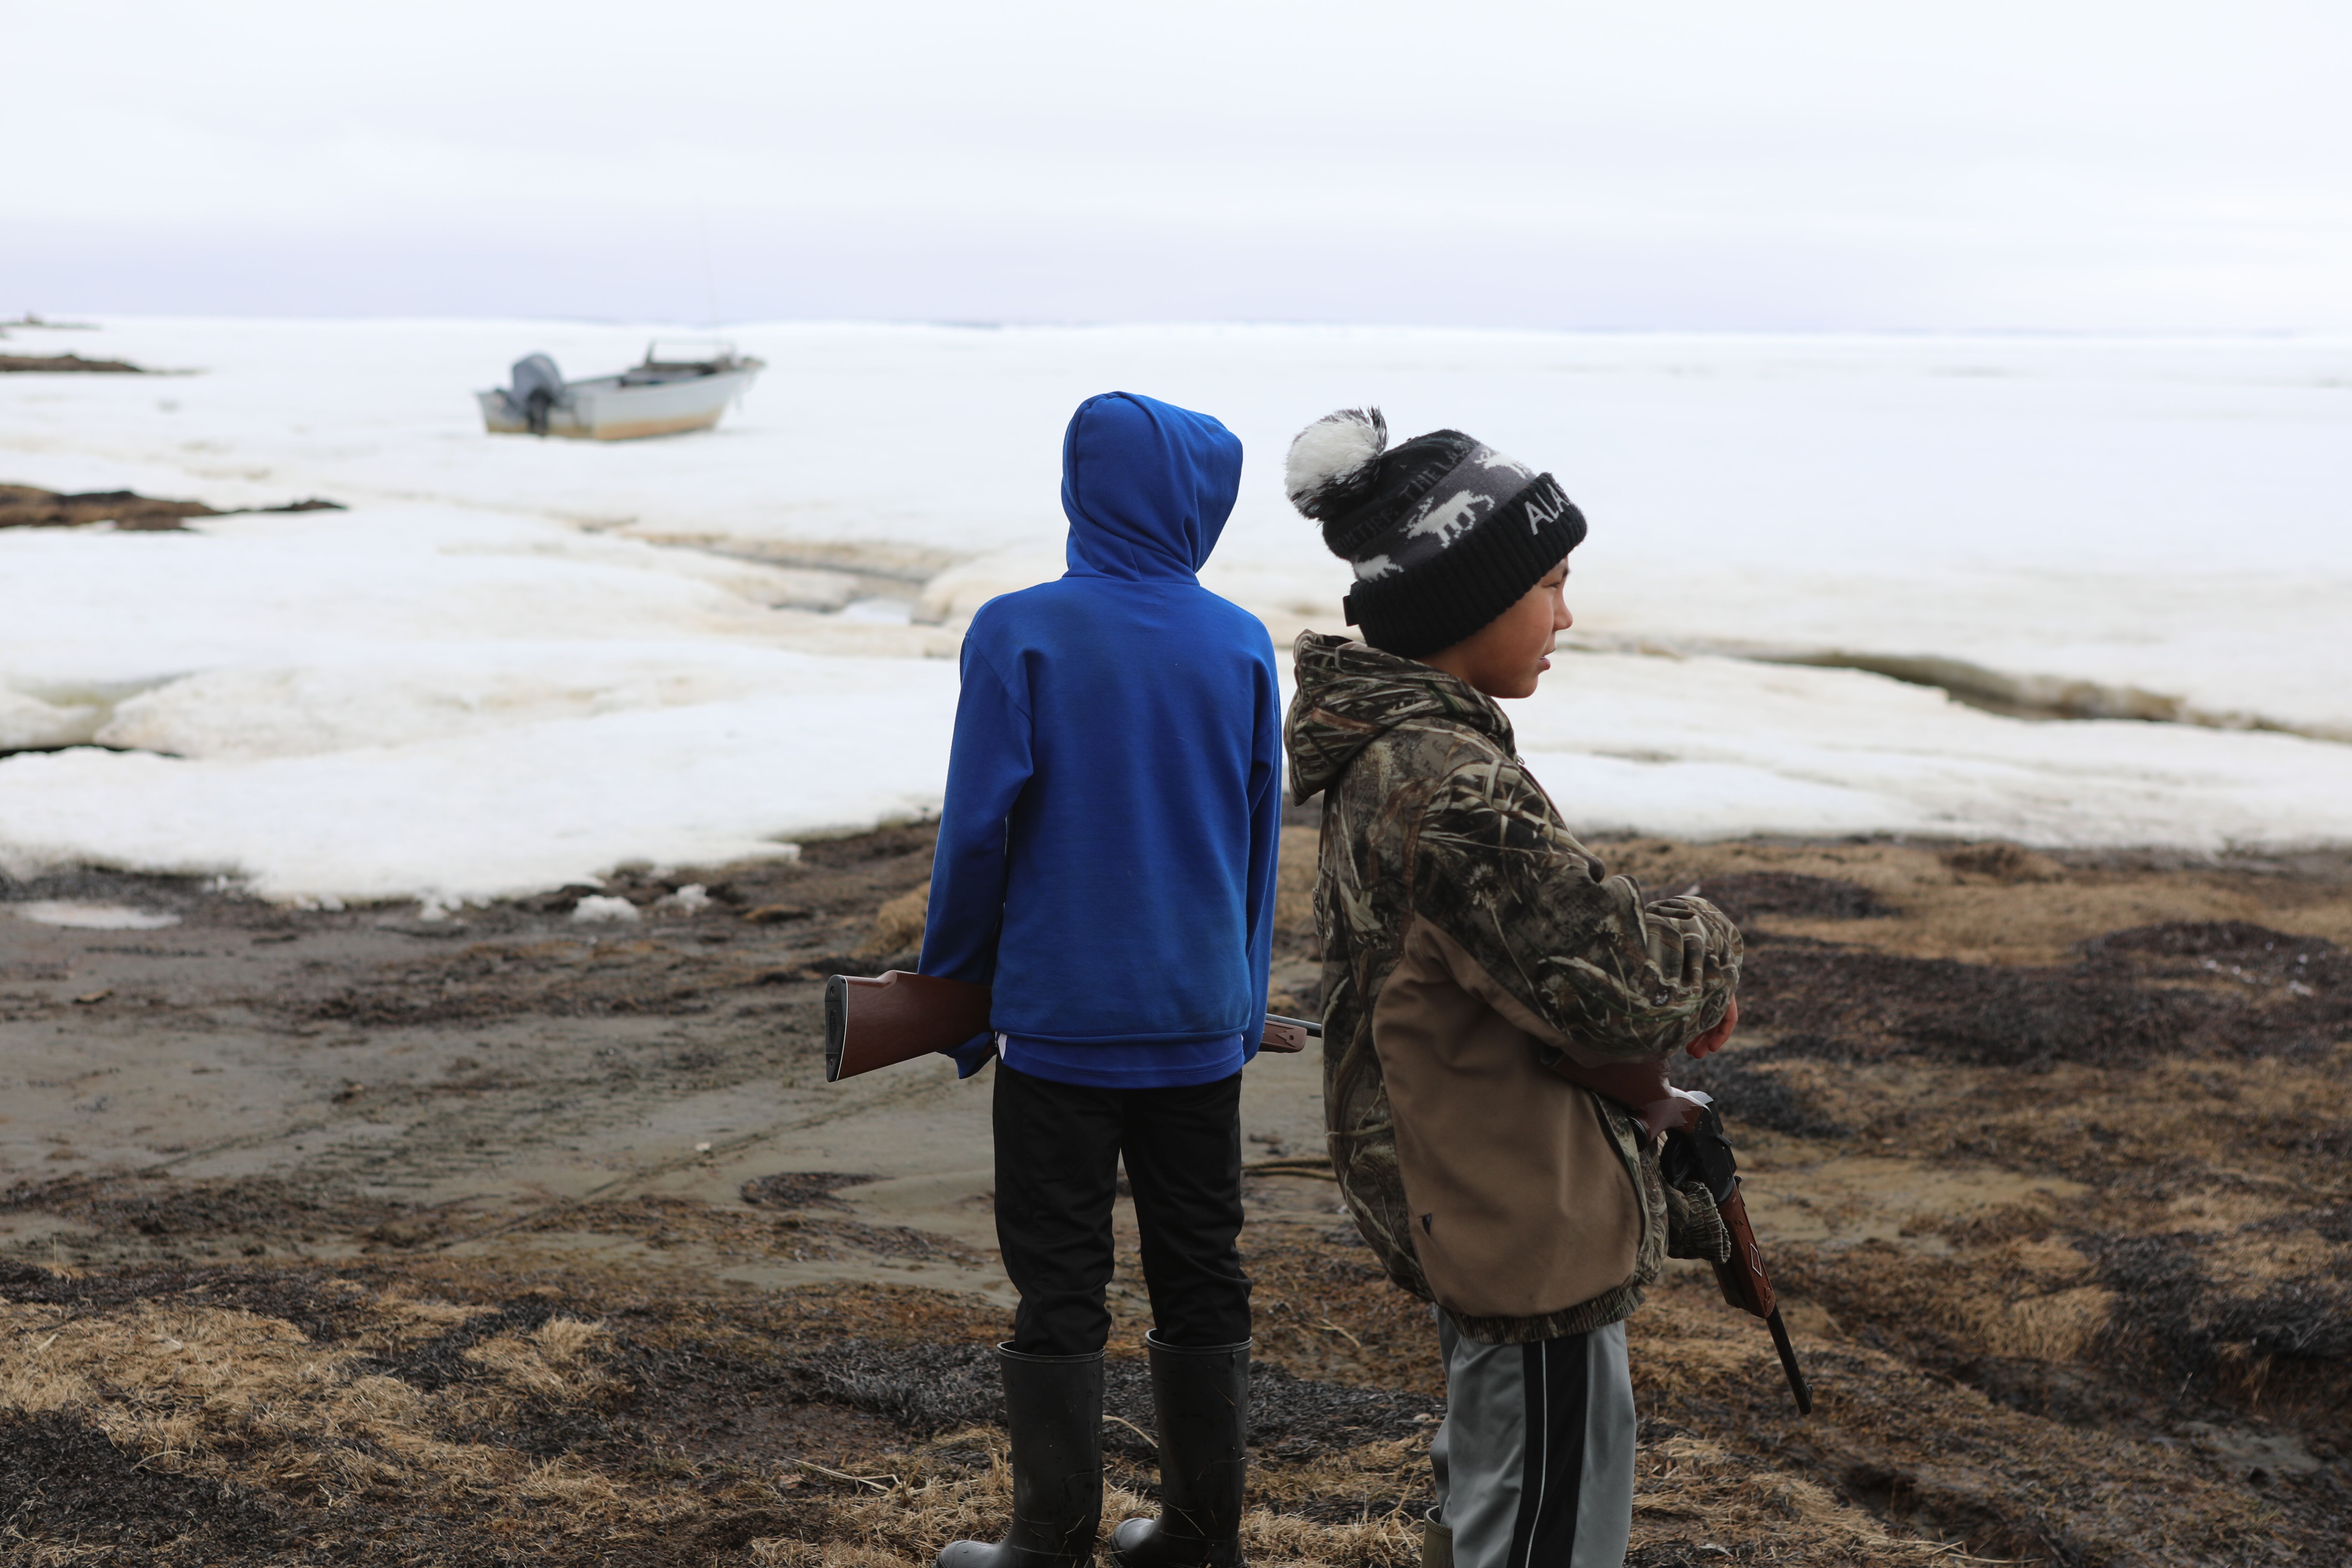 Young people hunt for small birds outside Shishmaref, Alaska, in the spring of 2019. They face uncertain futures because of the climate crisis